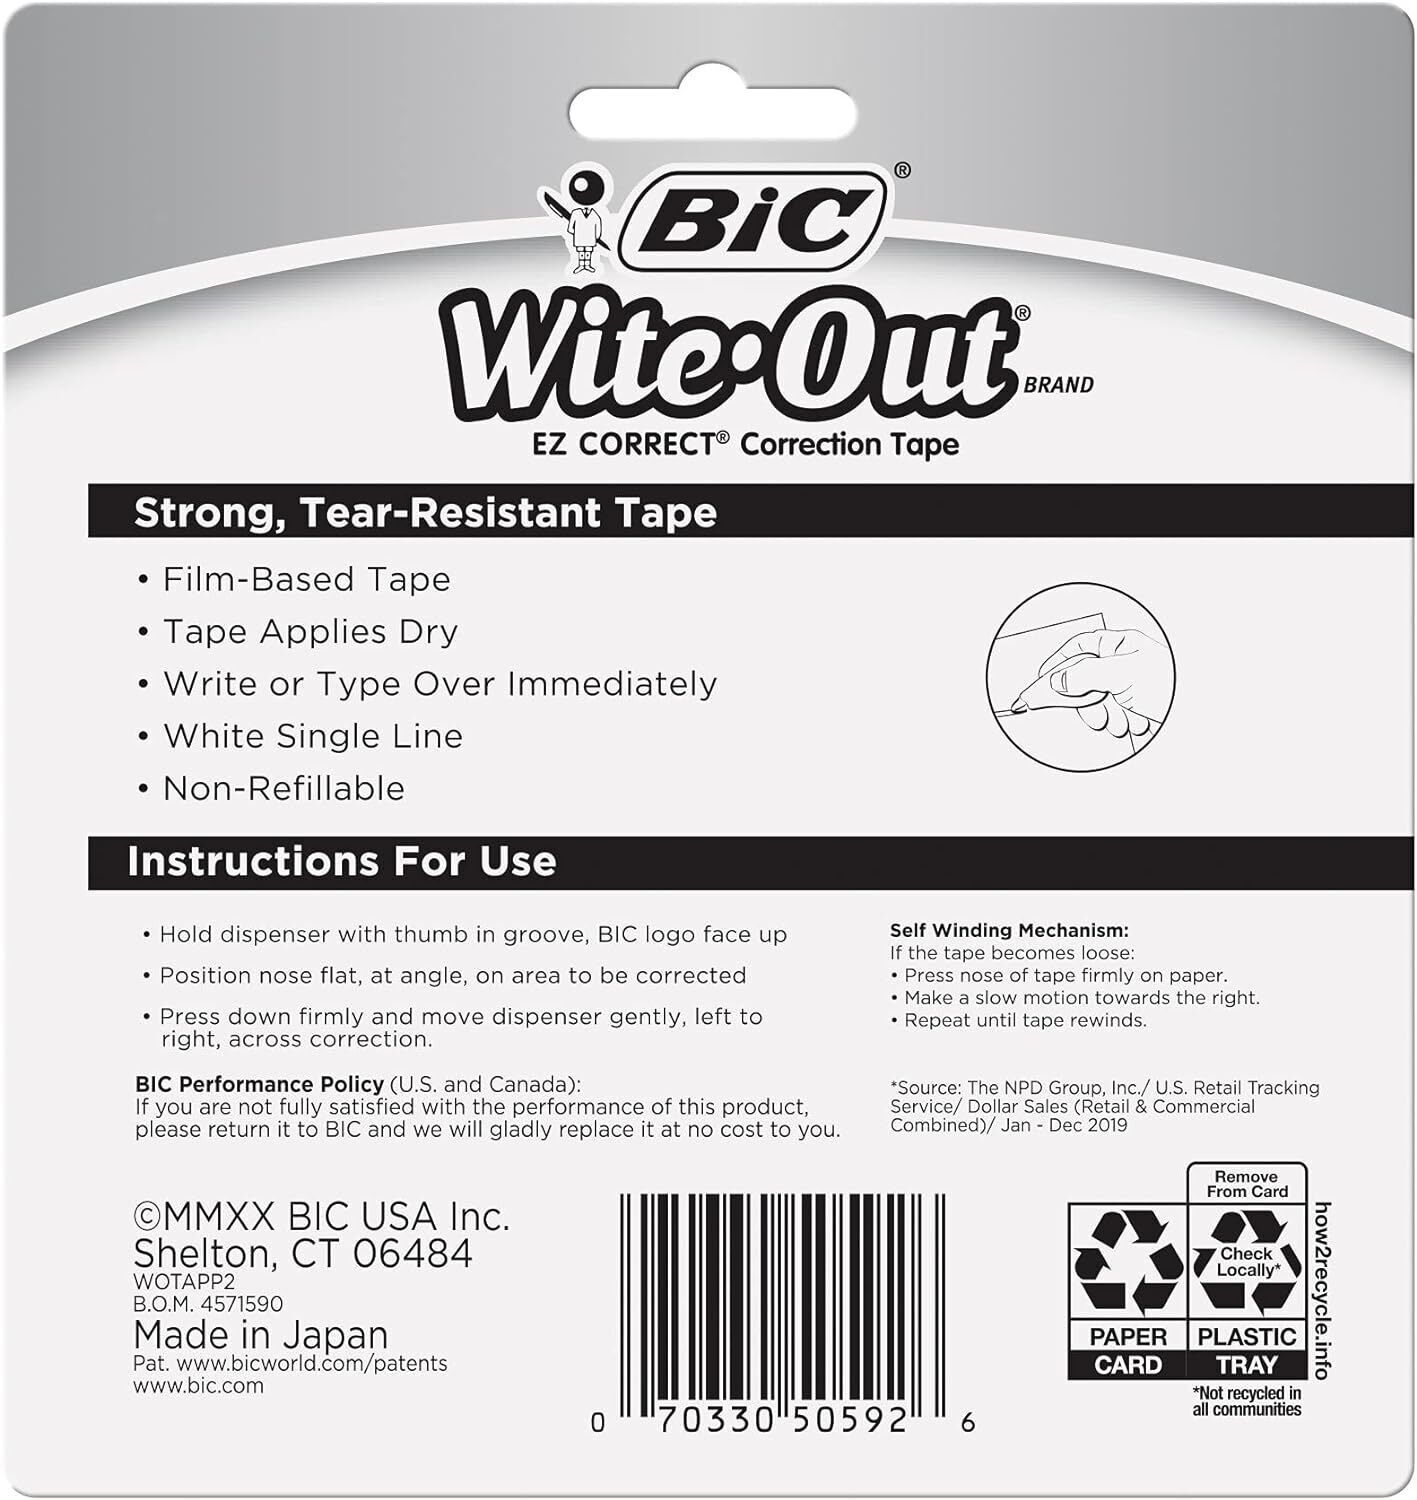 BIC Wite-Out Brand EZ Correct Correction Tape, 2 Count (Pack of 1), White  BIC WOTAPP21 - фотография #2